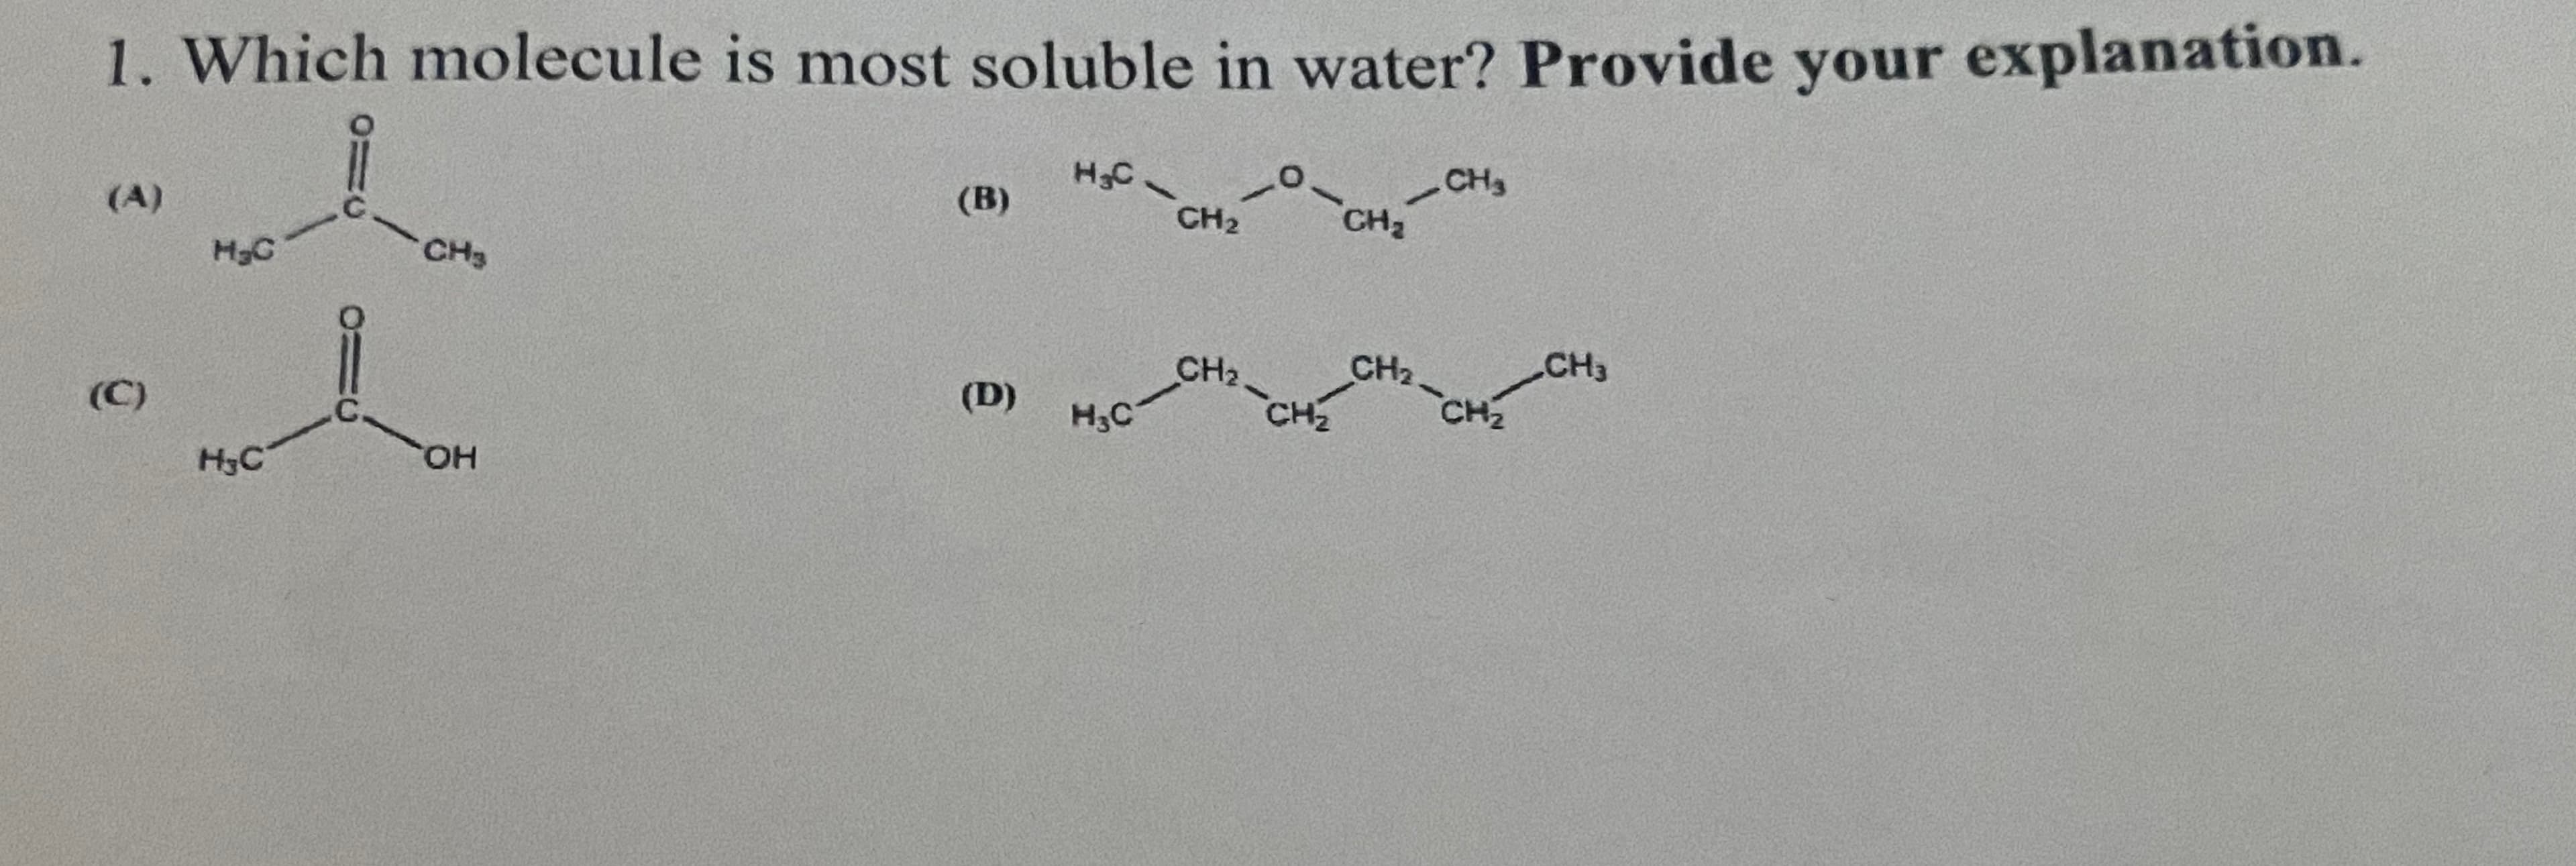 1. Which molecule is most soluble in water? Provide your explanation.
CH3
CH2
H3C.
(B)
CH2
(A)
CH3
CH3
CH
2
CH2
нс
CH2
(D)
CH2
(C)
.C.
ОН
H3C
